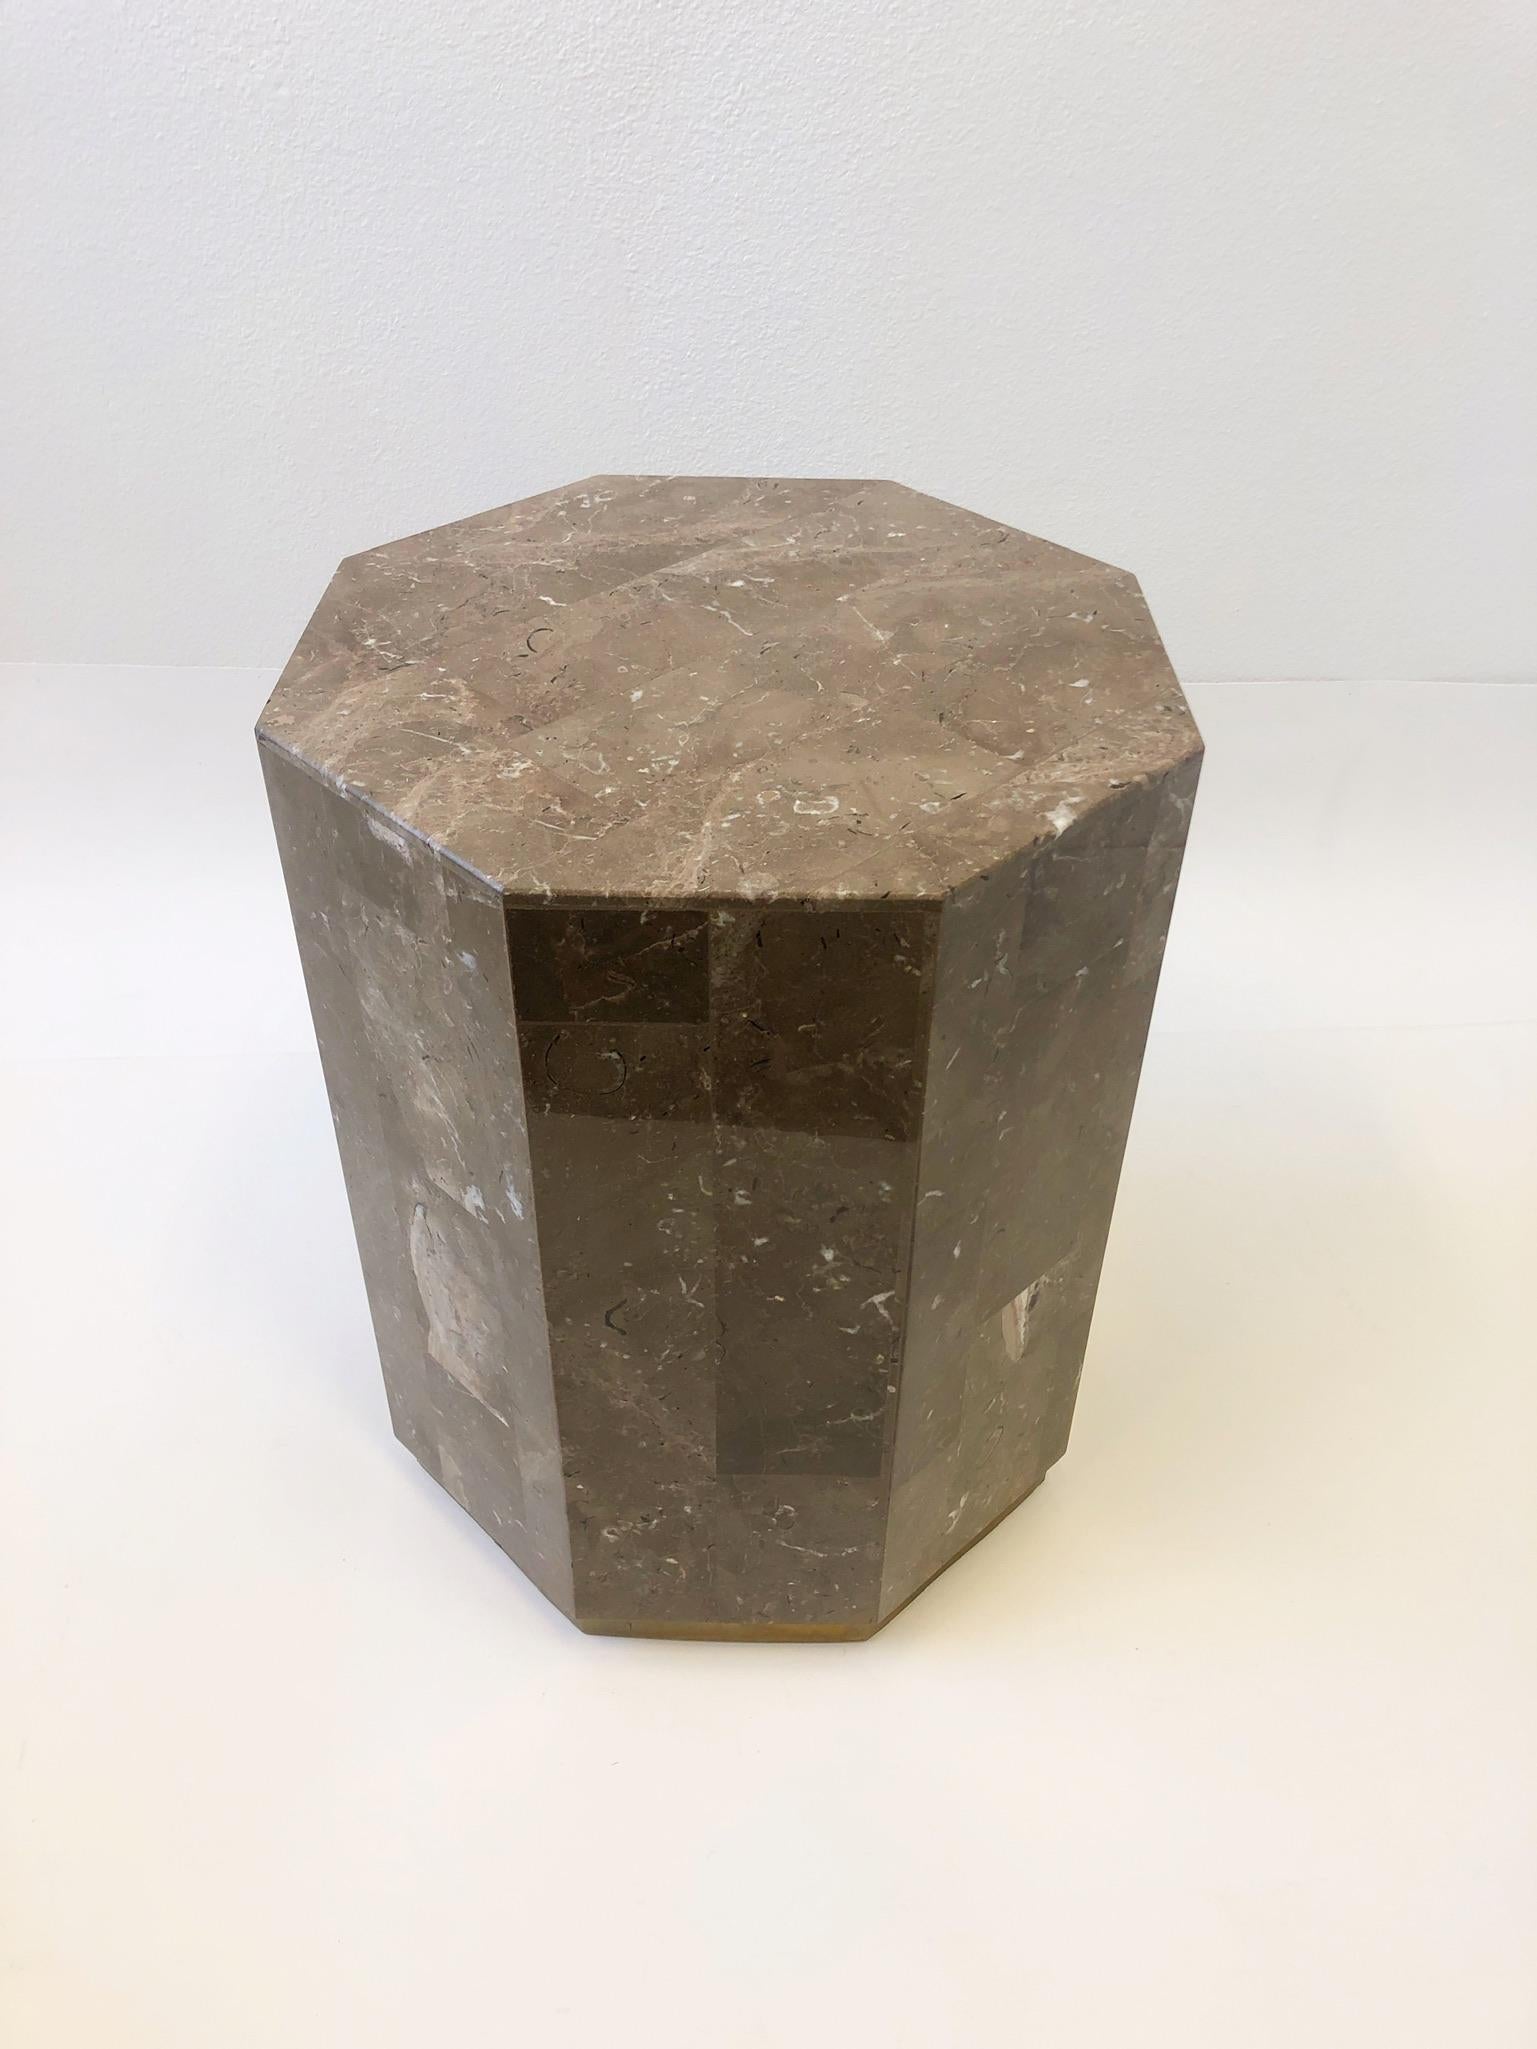 Satin brass and lite brown with white speckled Italian Marble pedestal from the 1980’s.
This can be used as a game table base if desired. 
Measurements: 25.75” high and 21.5” diameter.